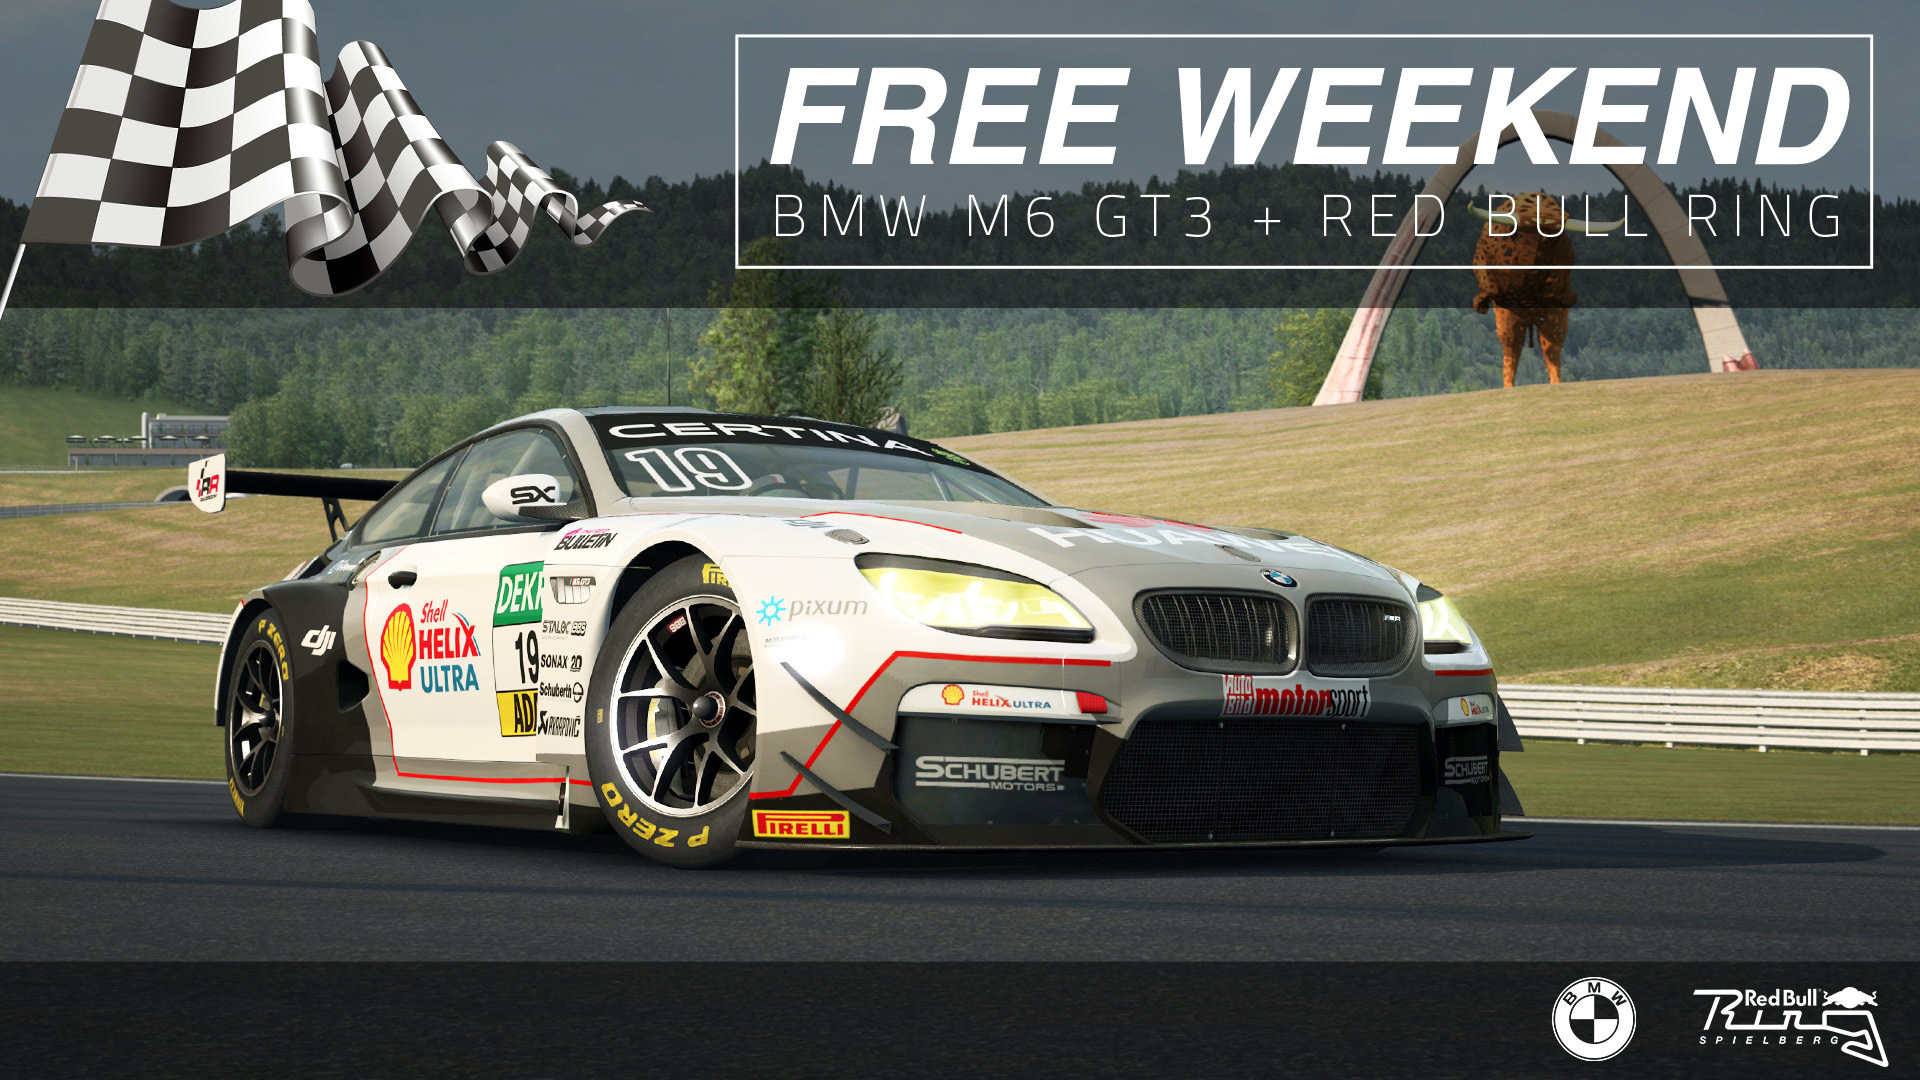 Raceroom Racing Experience Weekend With The Bmw M6 Gt3 And